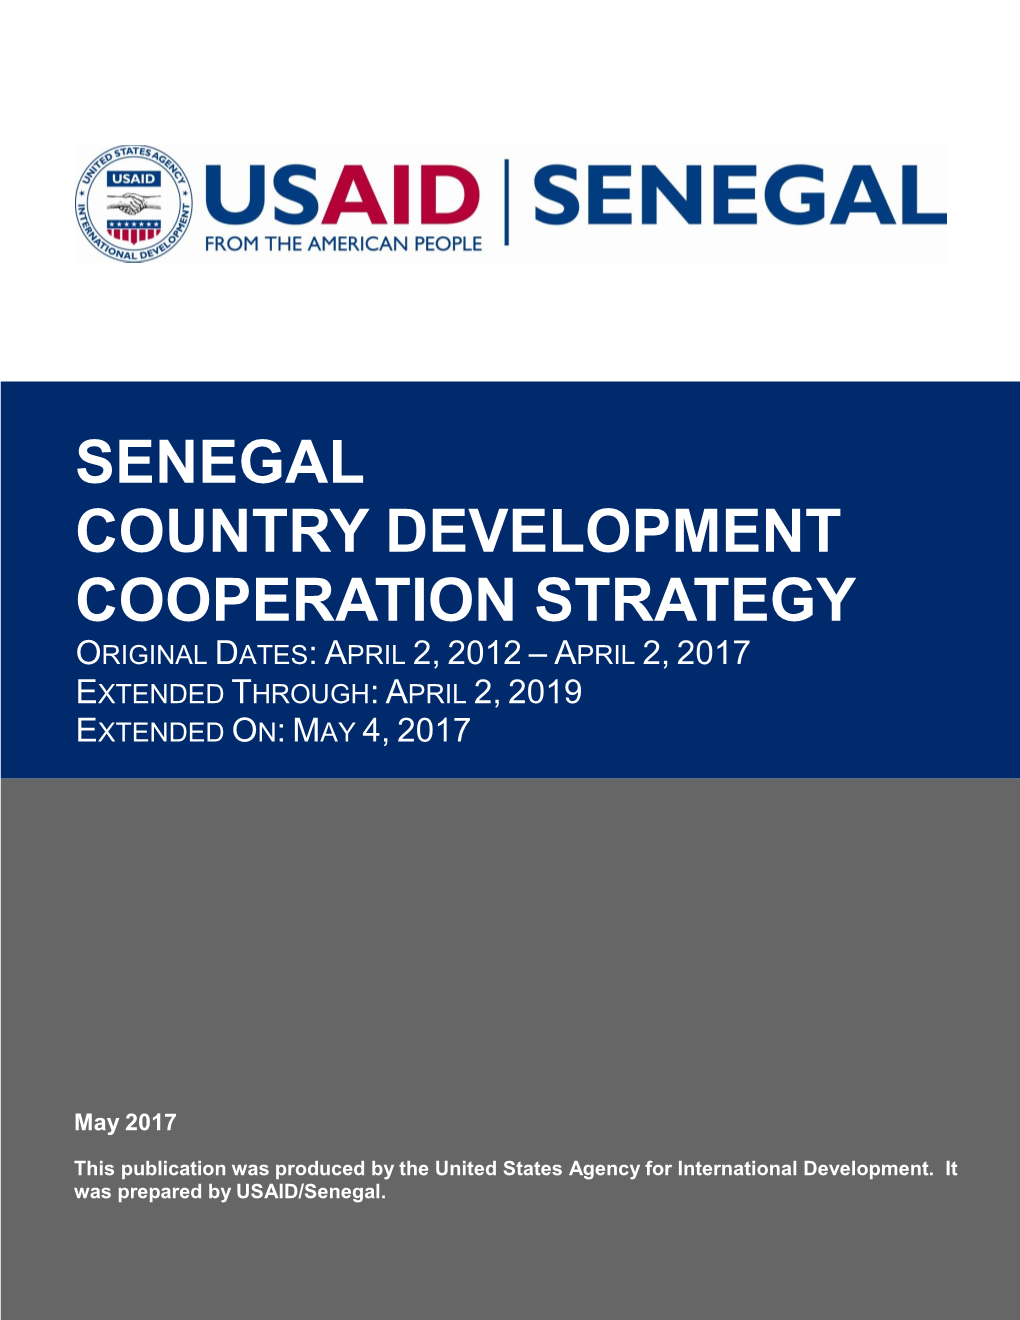 Senegal Country Development Cooperation Strategy Original Dates: April 2, 2012 – April 2, 2017 Extended Through: April 2, 2019 Extended On: May 4, 2017